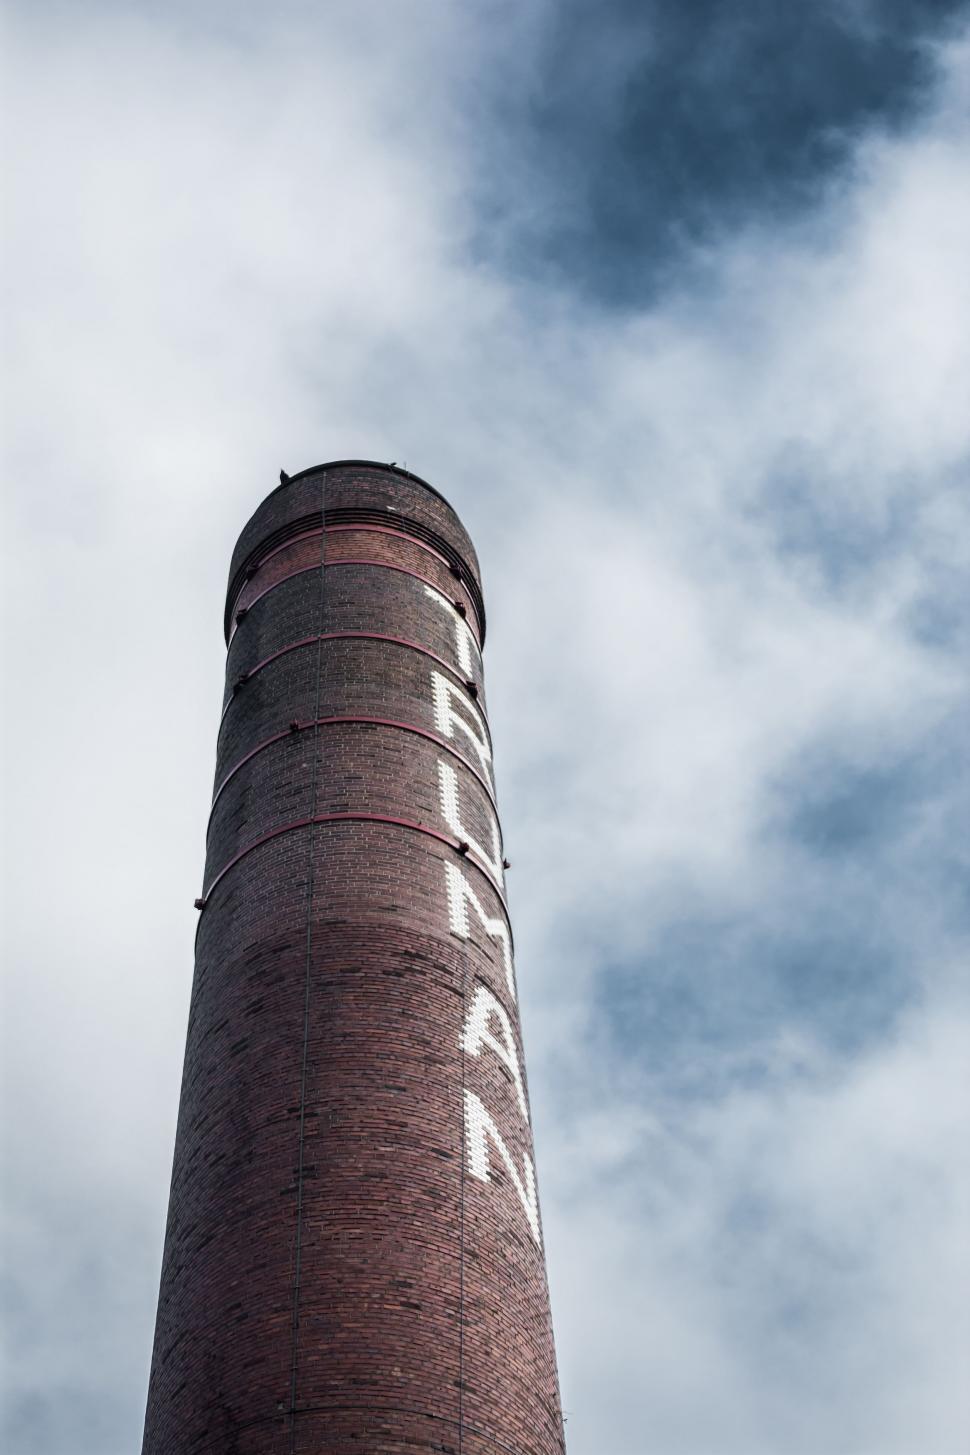 Free Image of Tall Brick Tower Against Sky 